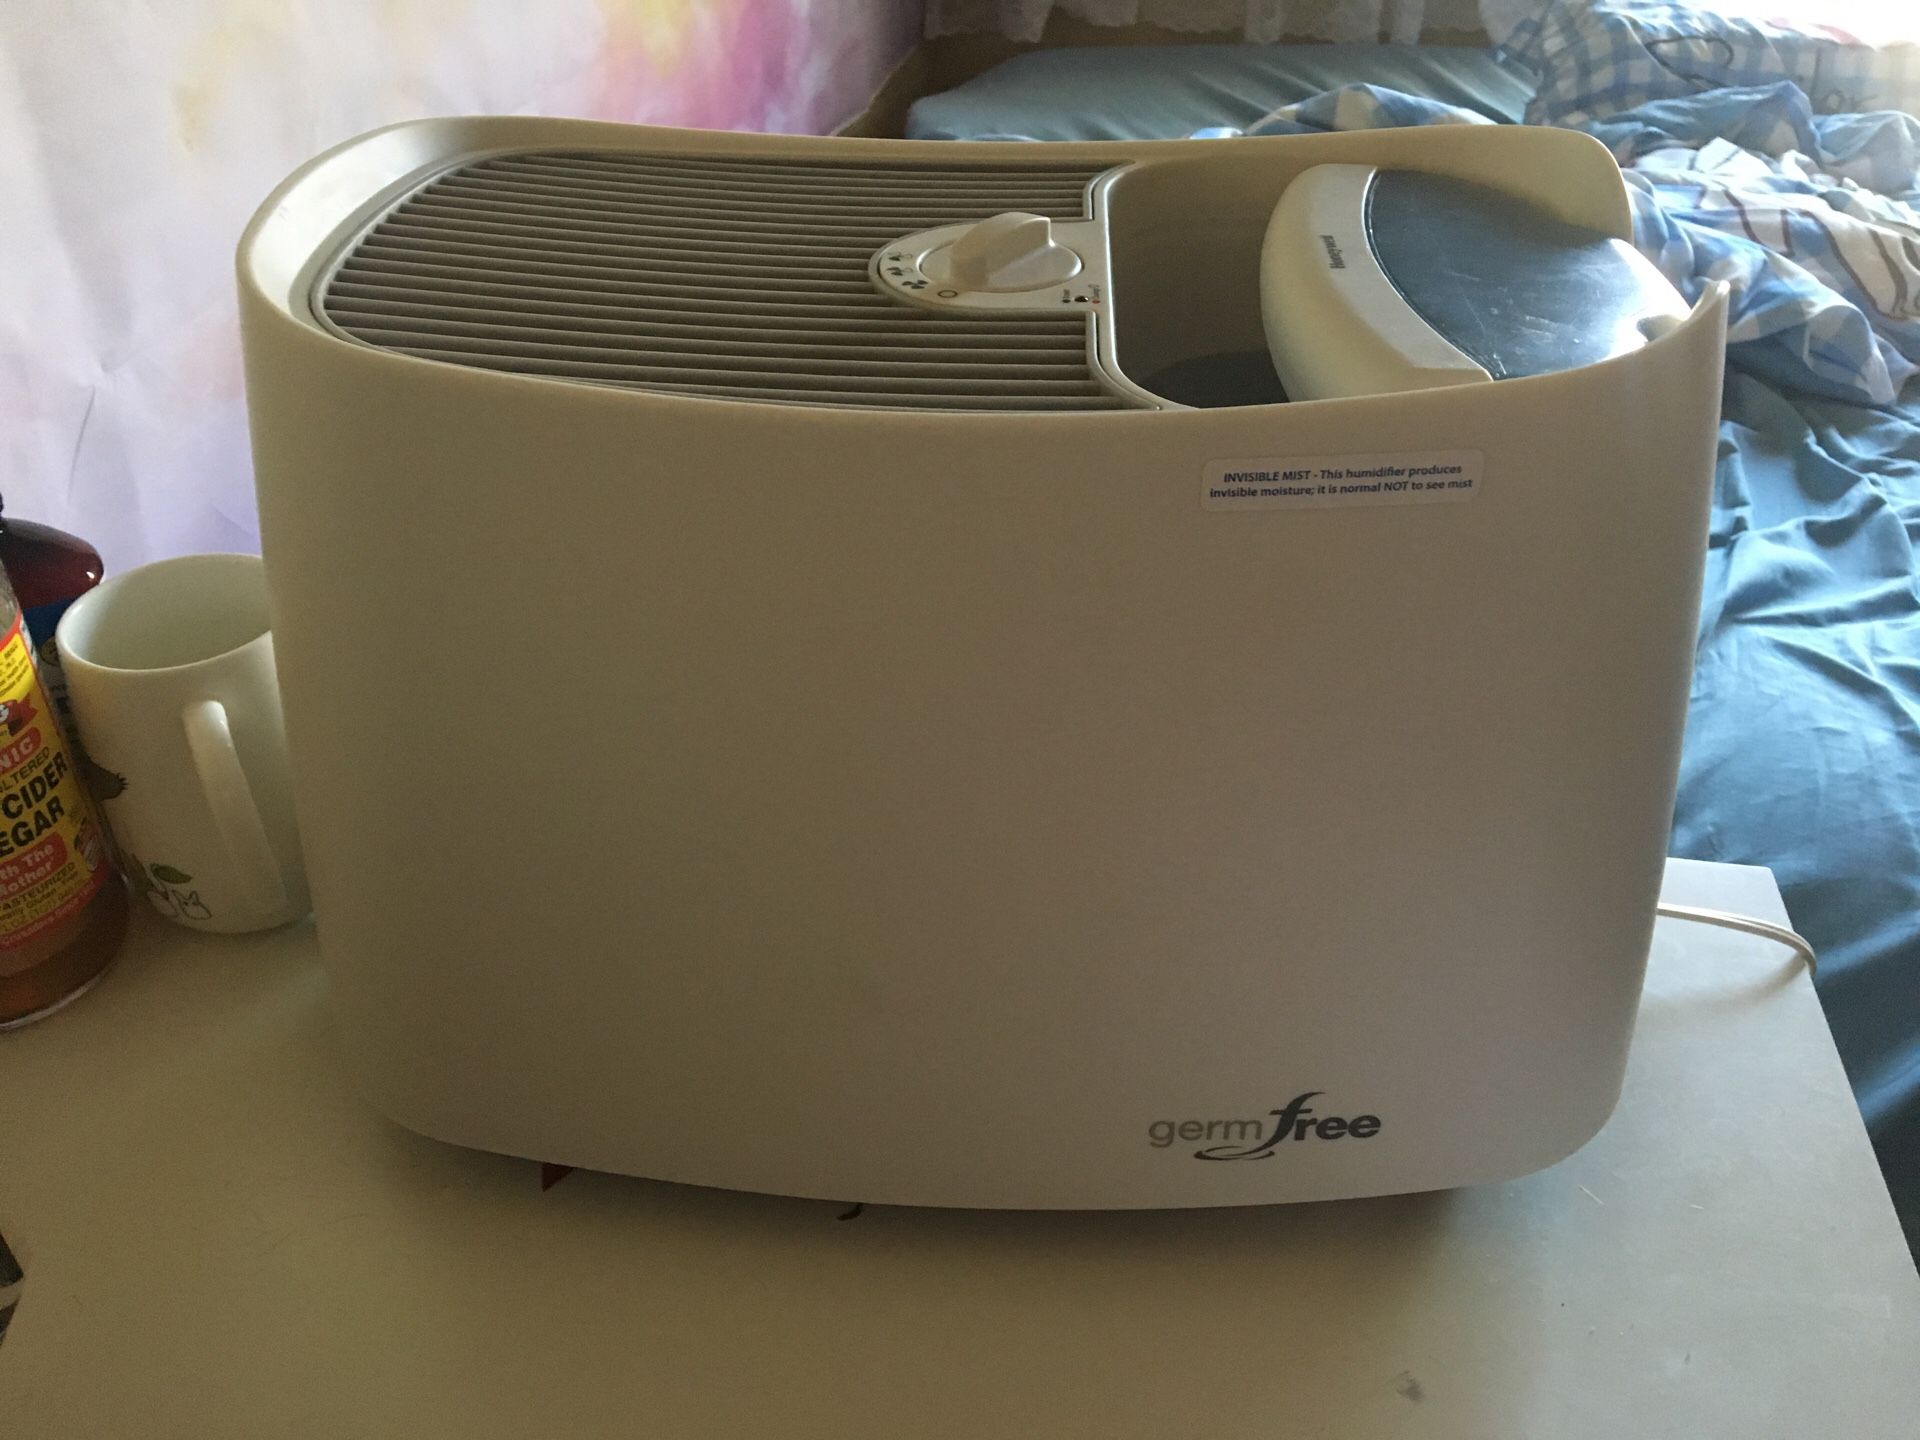 Honeywell germ free infrared humidifier